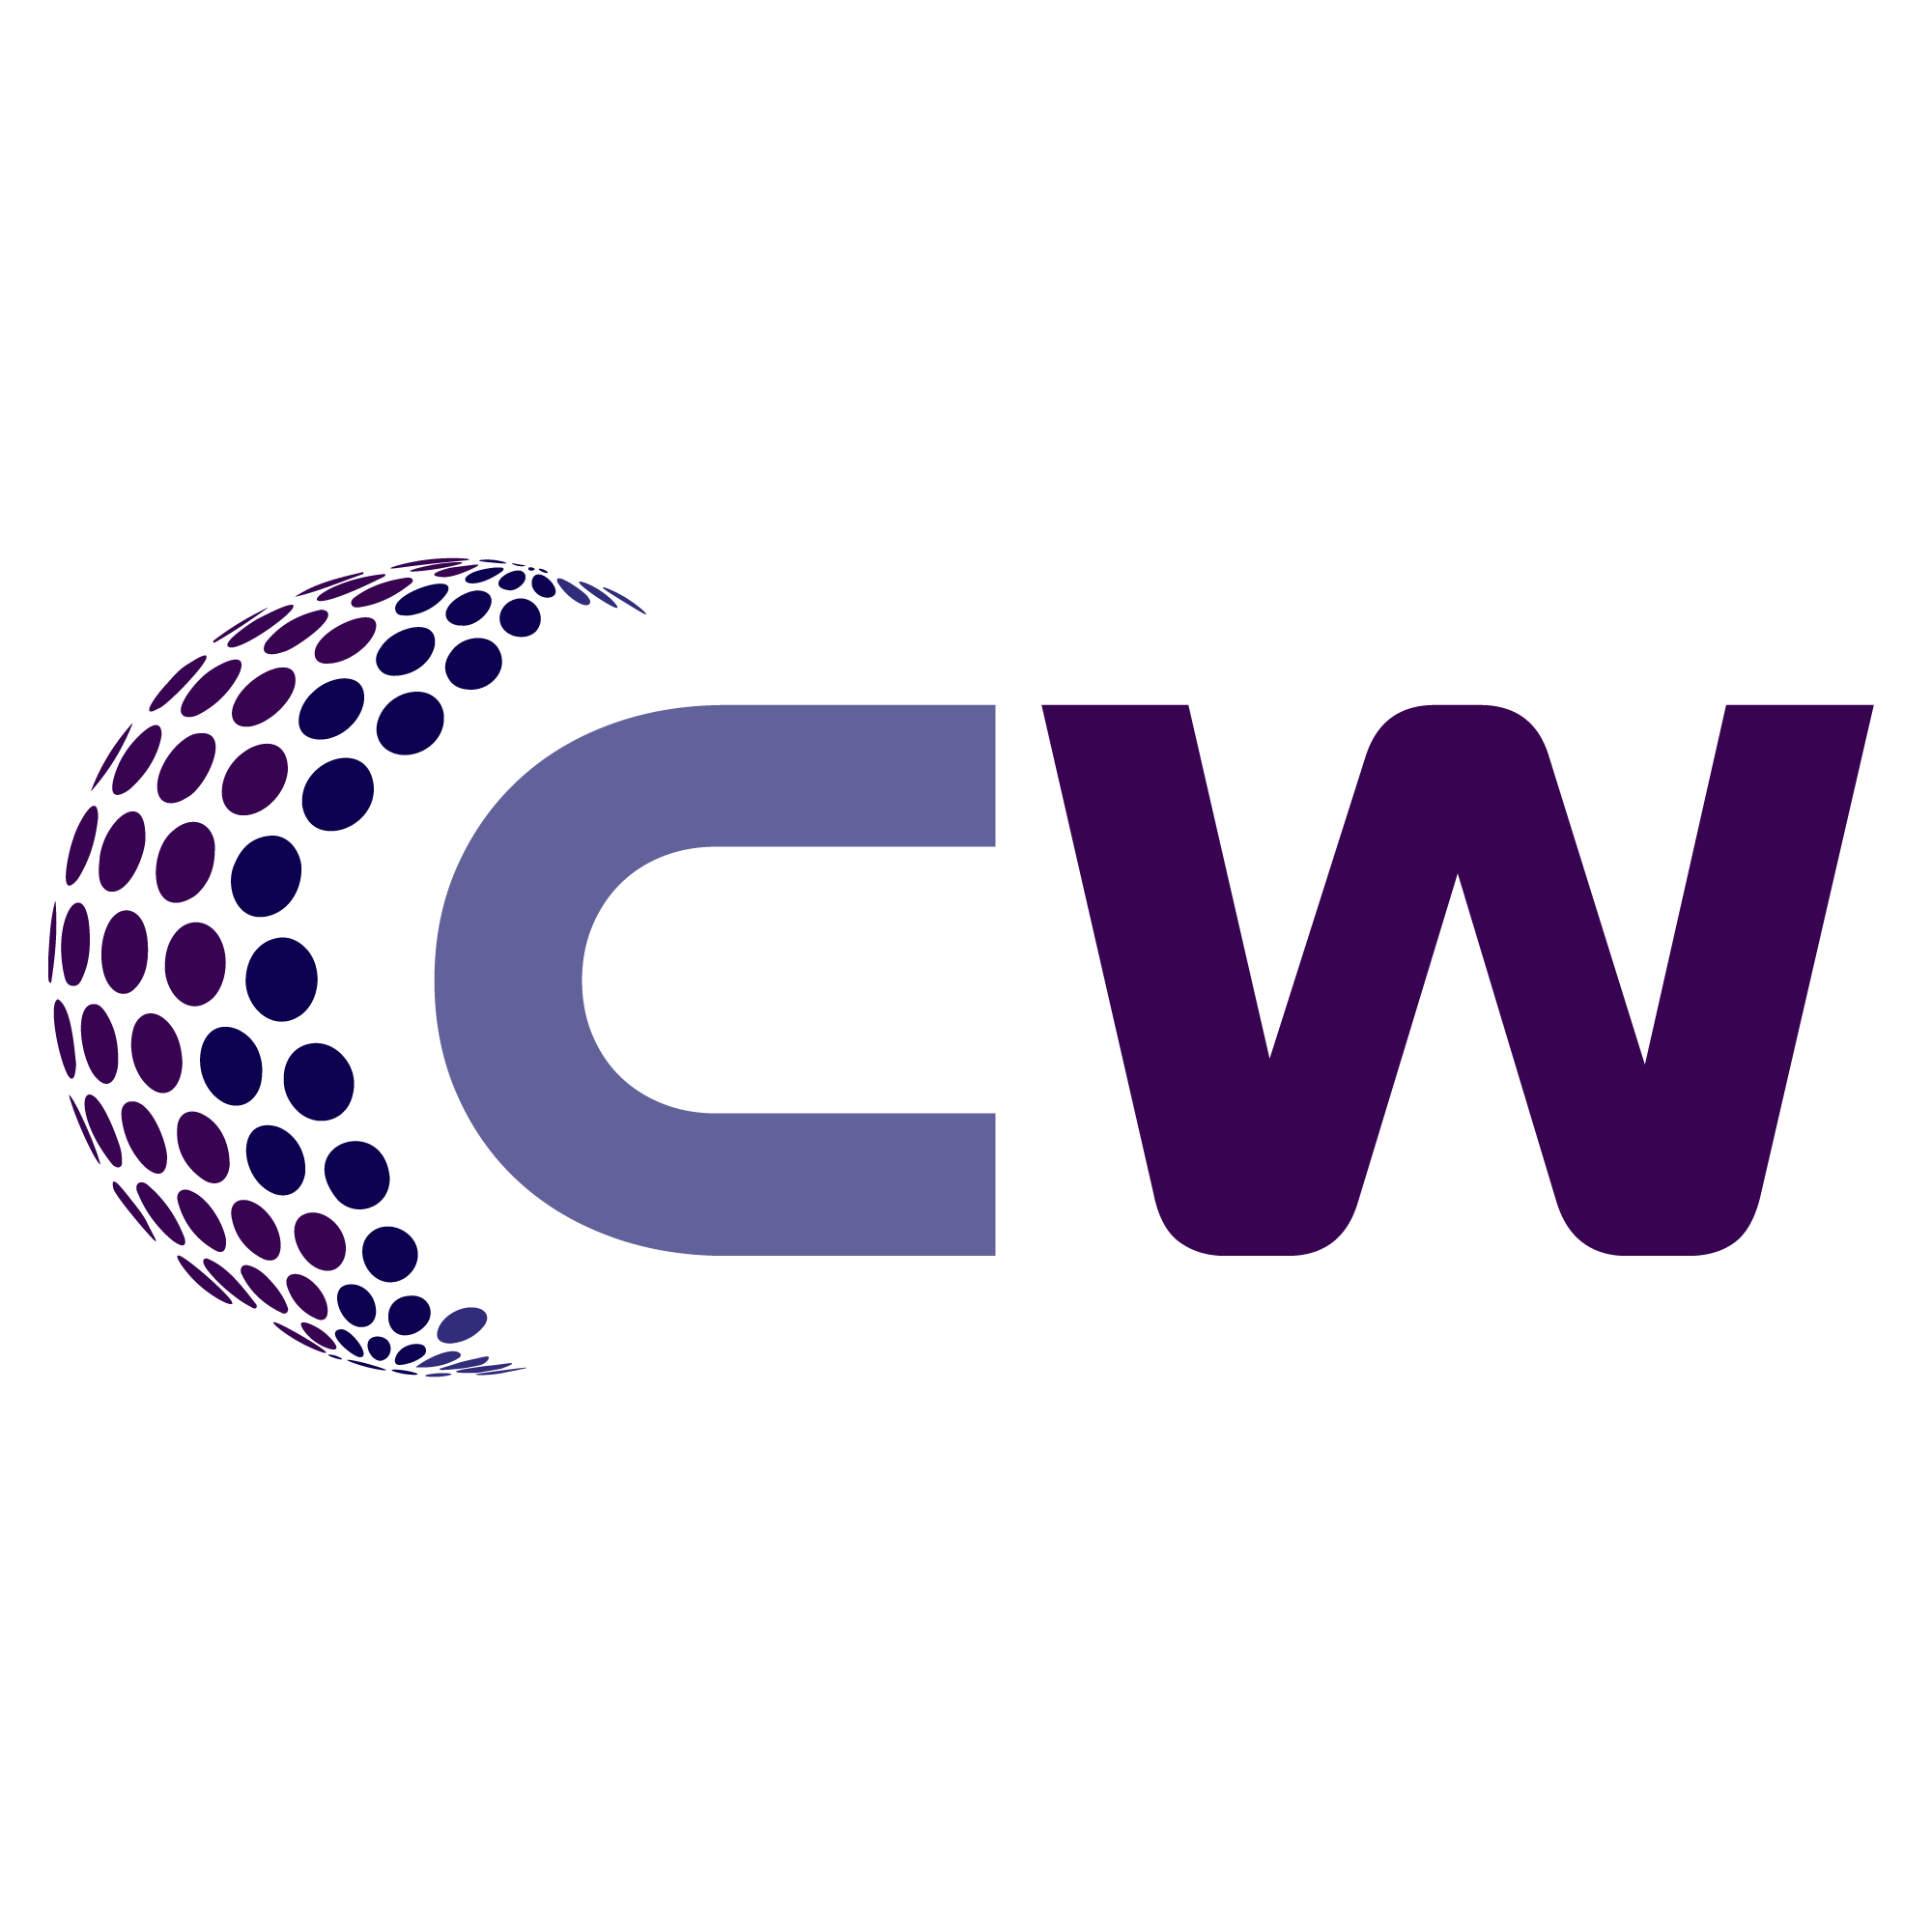 Banking 4.0 - Banking Digitalization & Transformation Conference organized by CW Europe